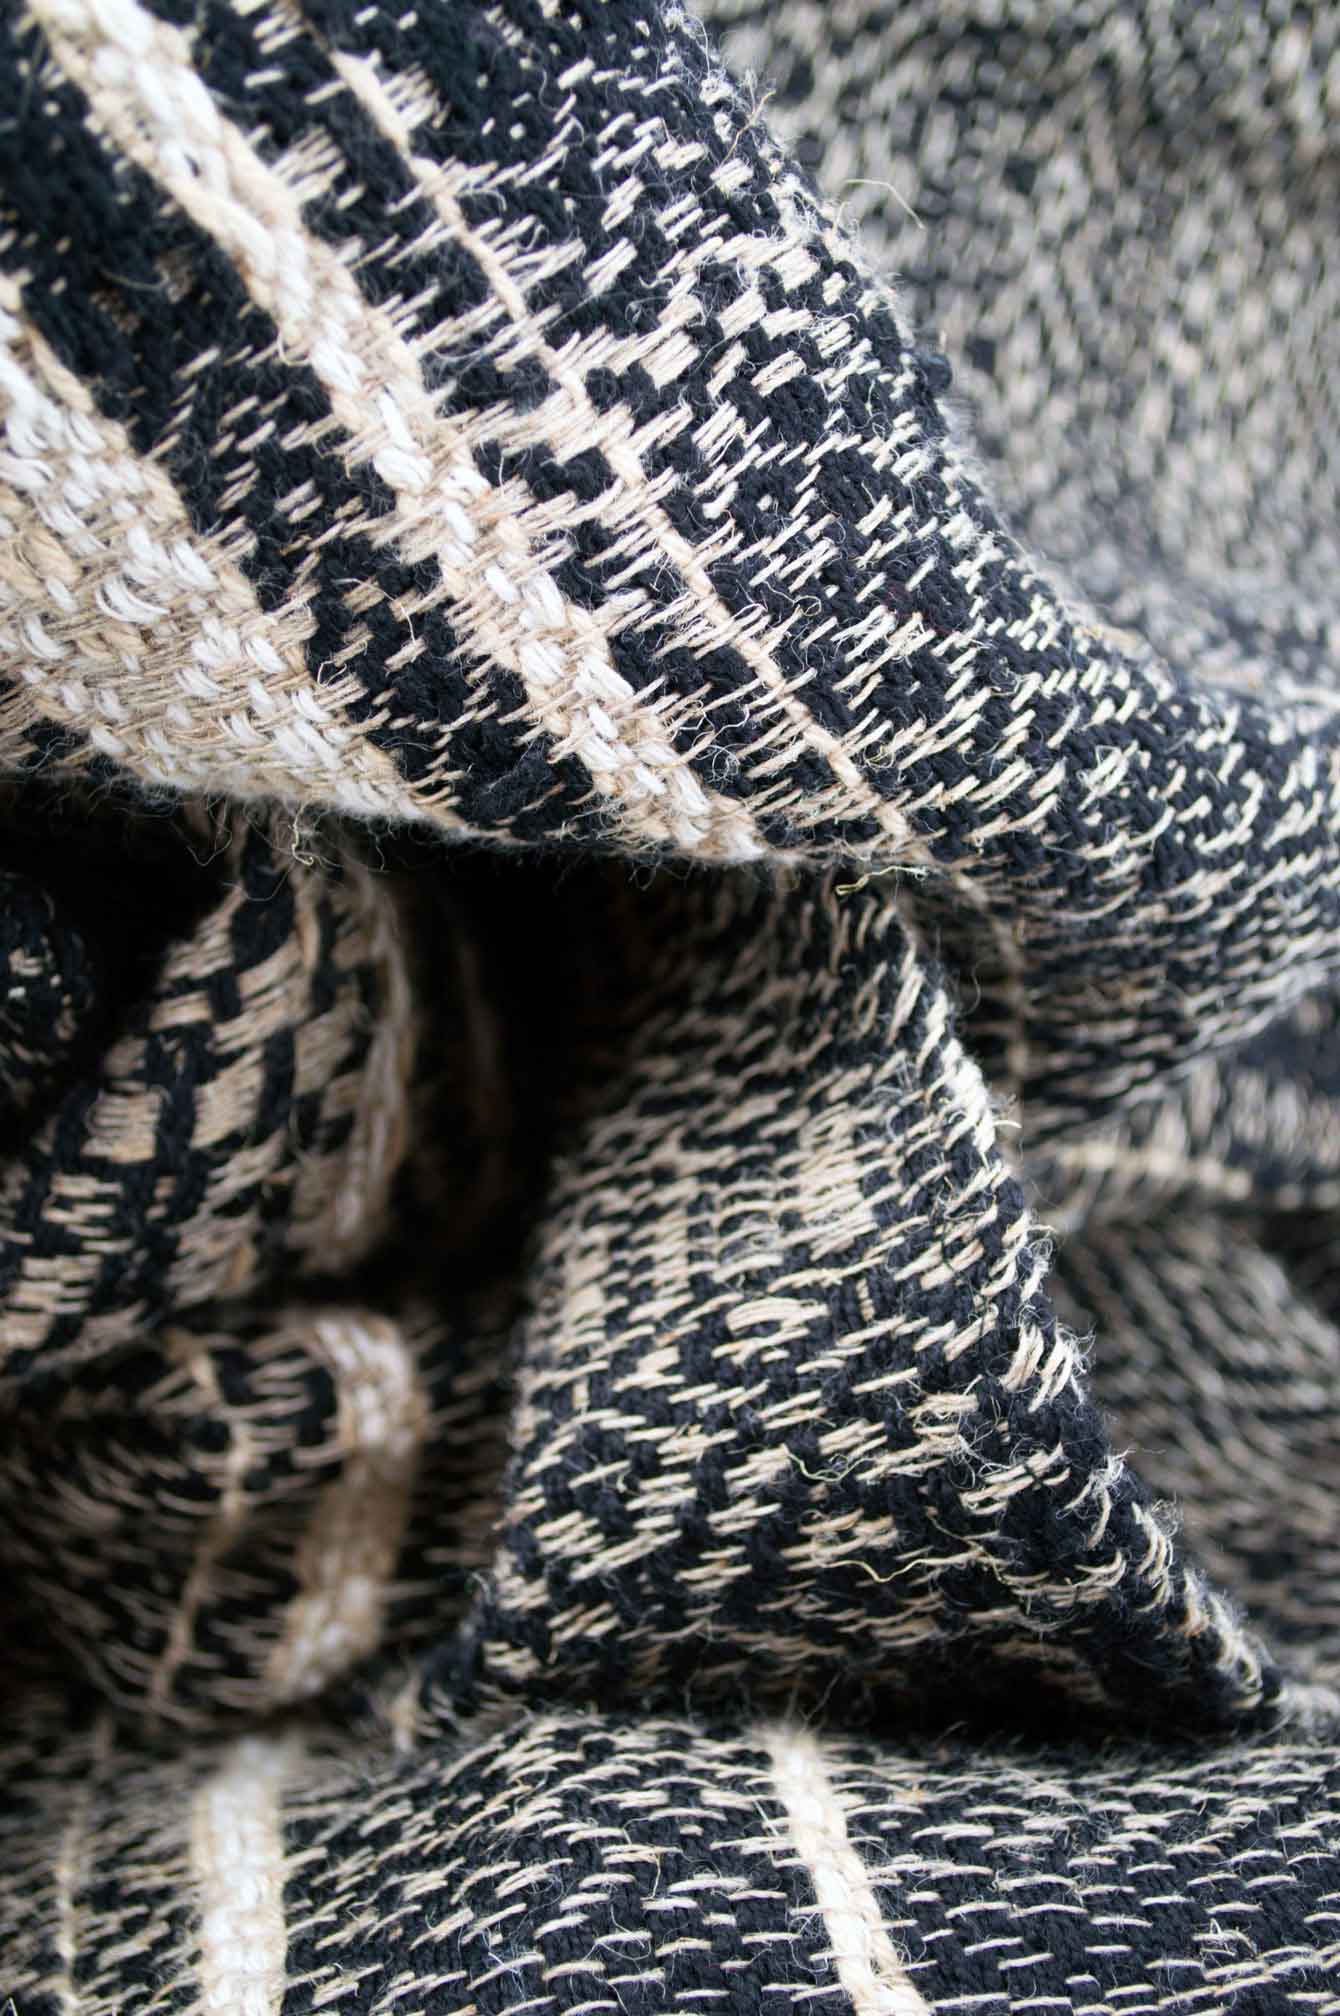 Throw blanket created with hemp, wool, linen. Union of different patterns and natural materials for the pleasure of the eyes.  Technique: Throw blanket hand-woven in a traditional way on non-mechanical looms in the 7th arrondissement of Paris in France.  Finishes: Right edge. Double stitching.  Size: 145 x 200 cm.  Single piece / 1 copy only.